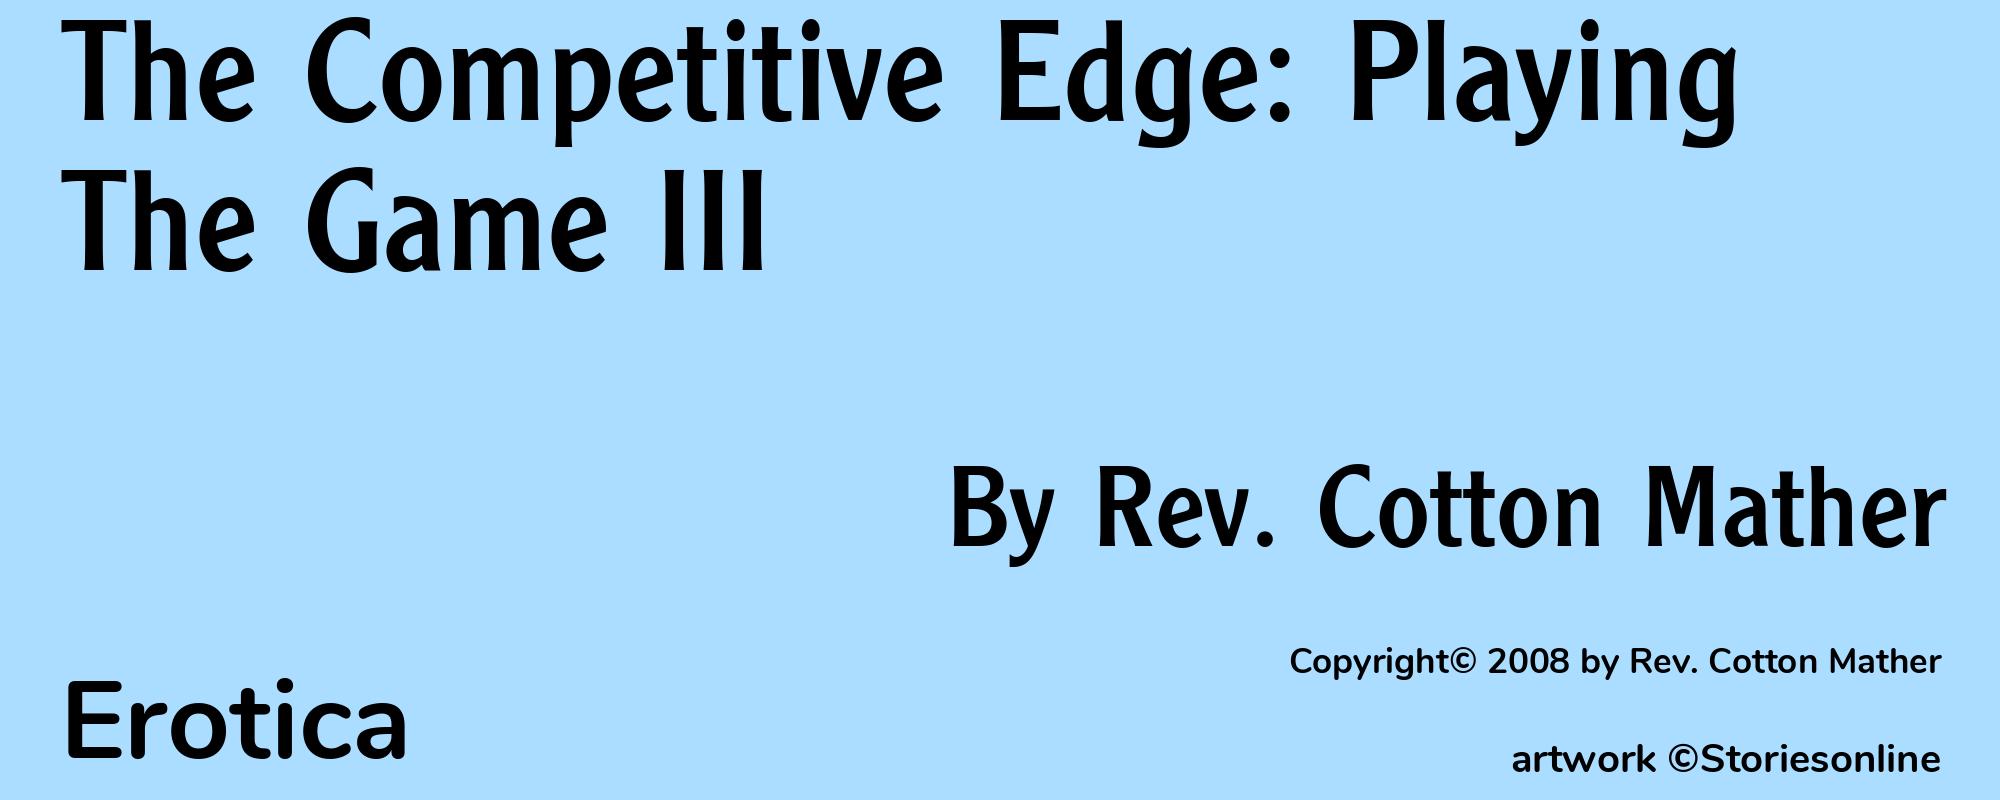 The Competitive Edge: Playing The Game III - Cover